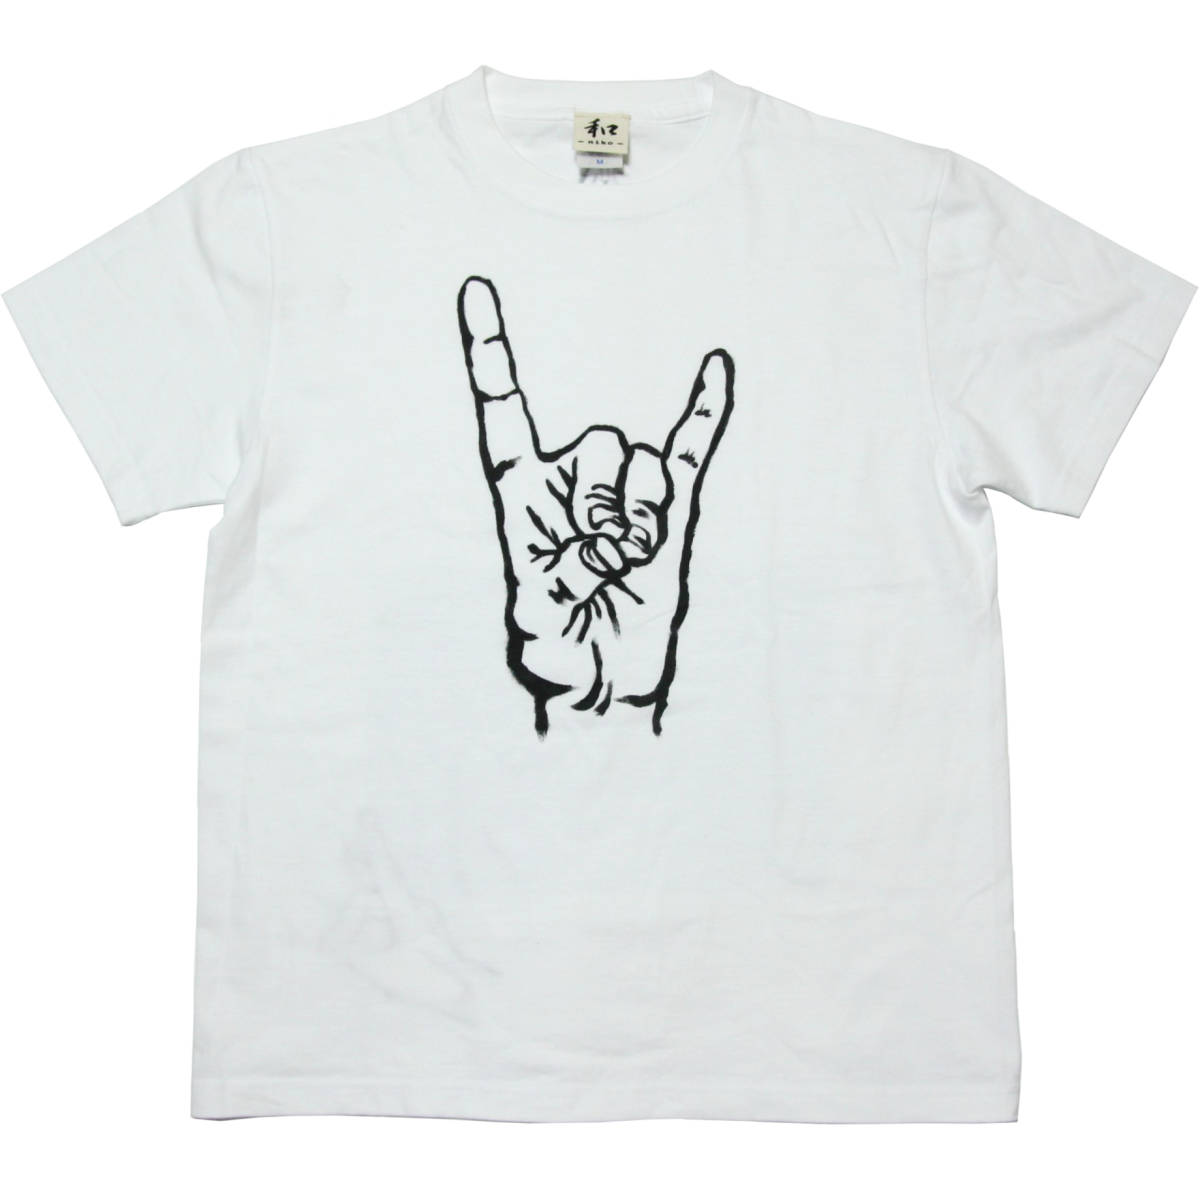 Men's T-shirt, size M, white, Fox hand sign T-shirt, white, handmade, hand-drawn T-shirt, Kanji, Medium size, Crew neck, Patterned